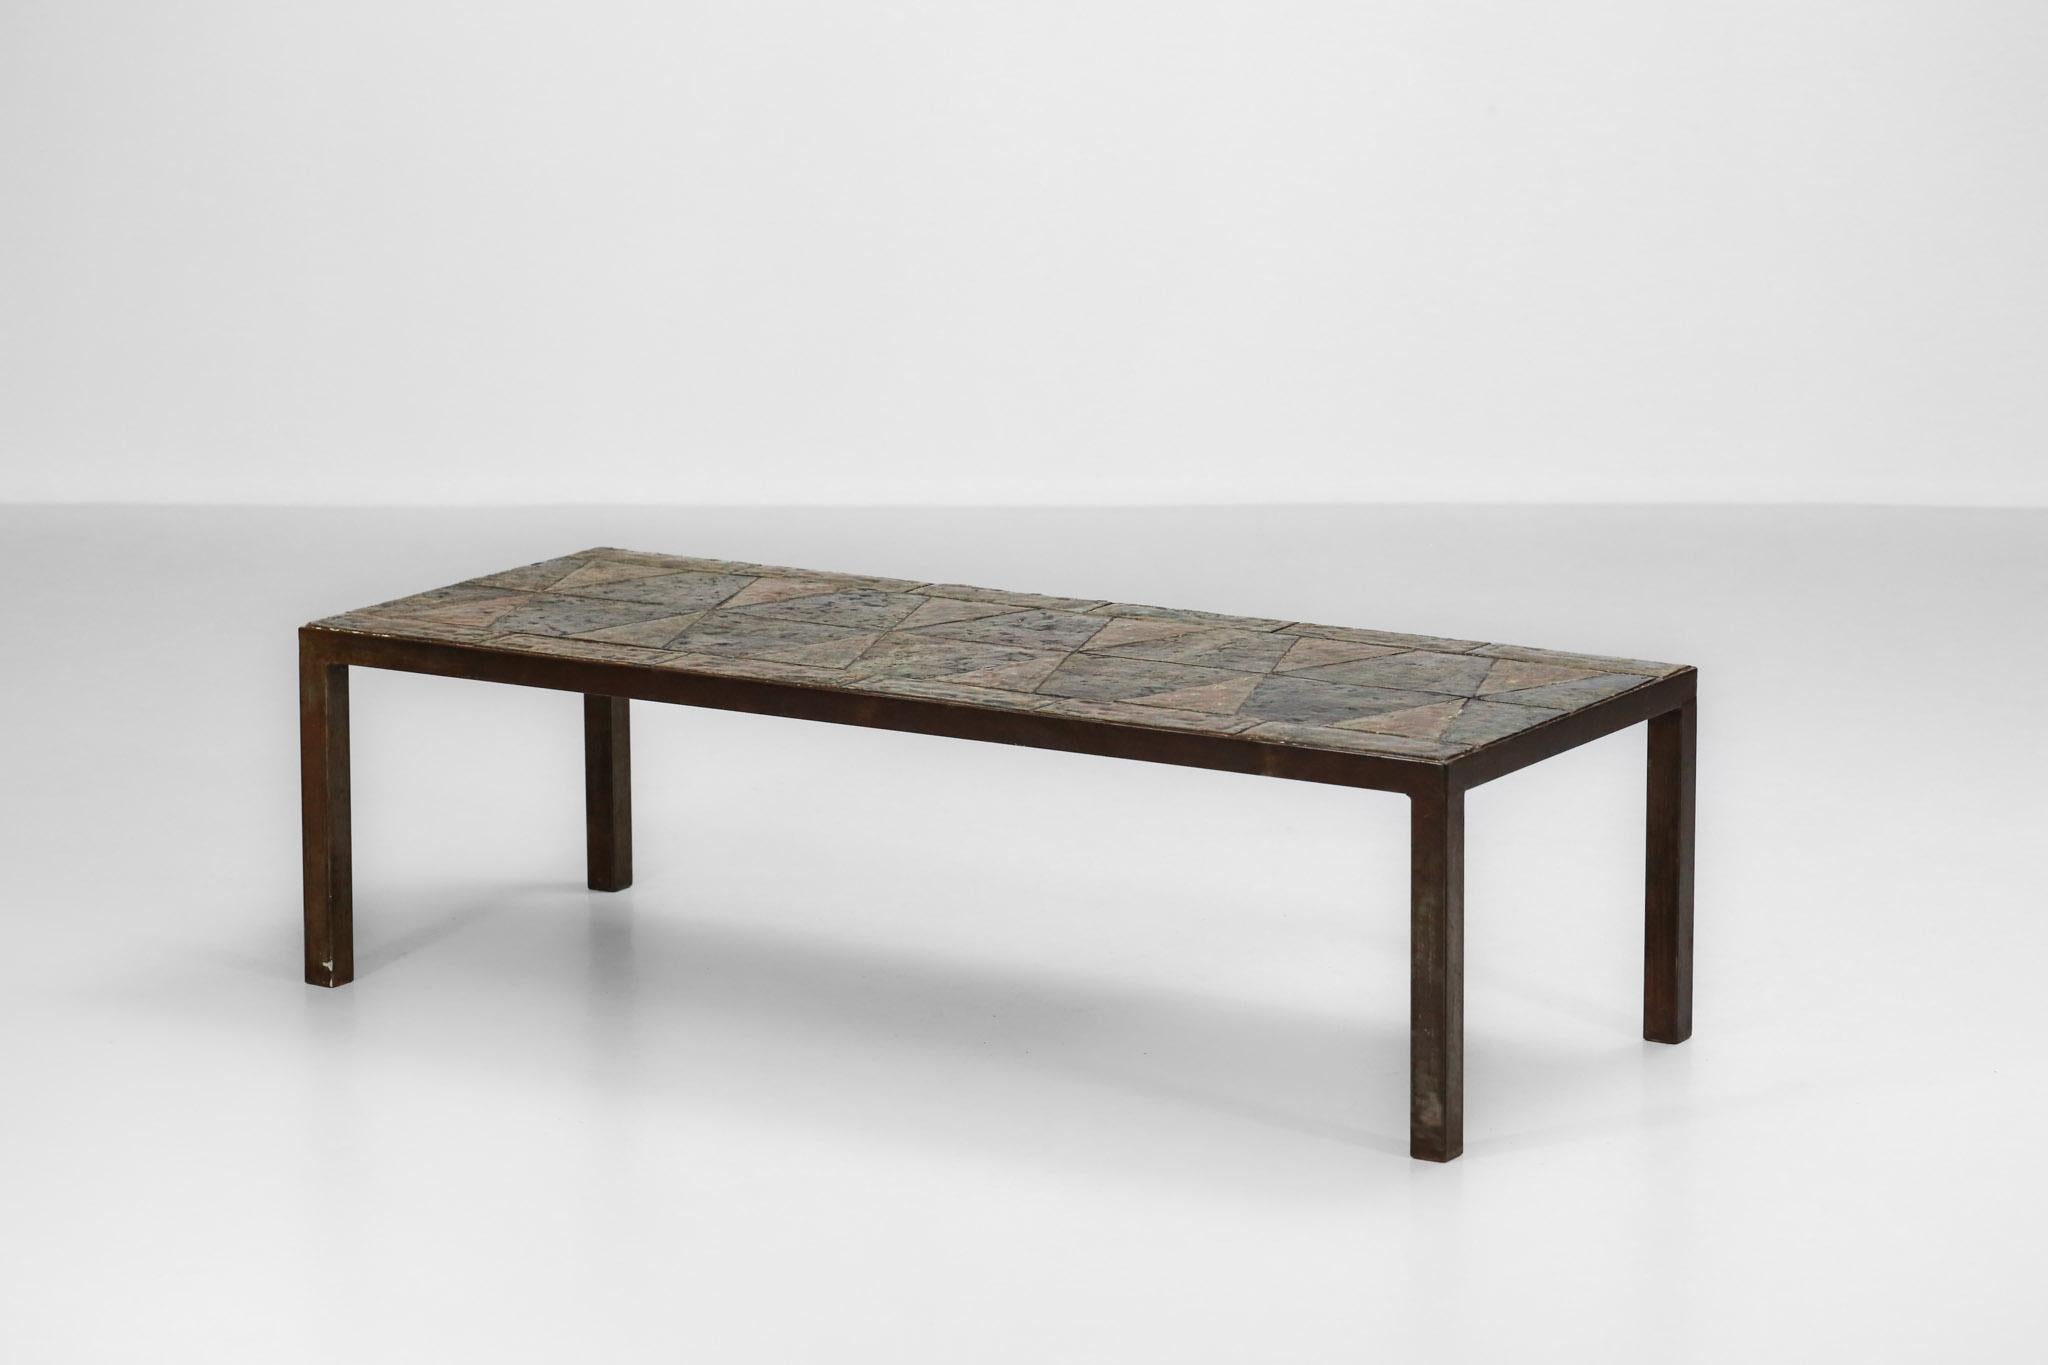 Brutalist coffee table from the 1960s made of enameled lava stones forming a geometrical decoration.
Legs in raw steel.